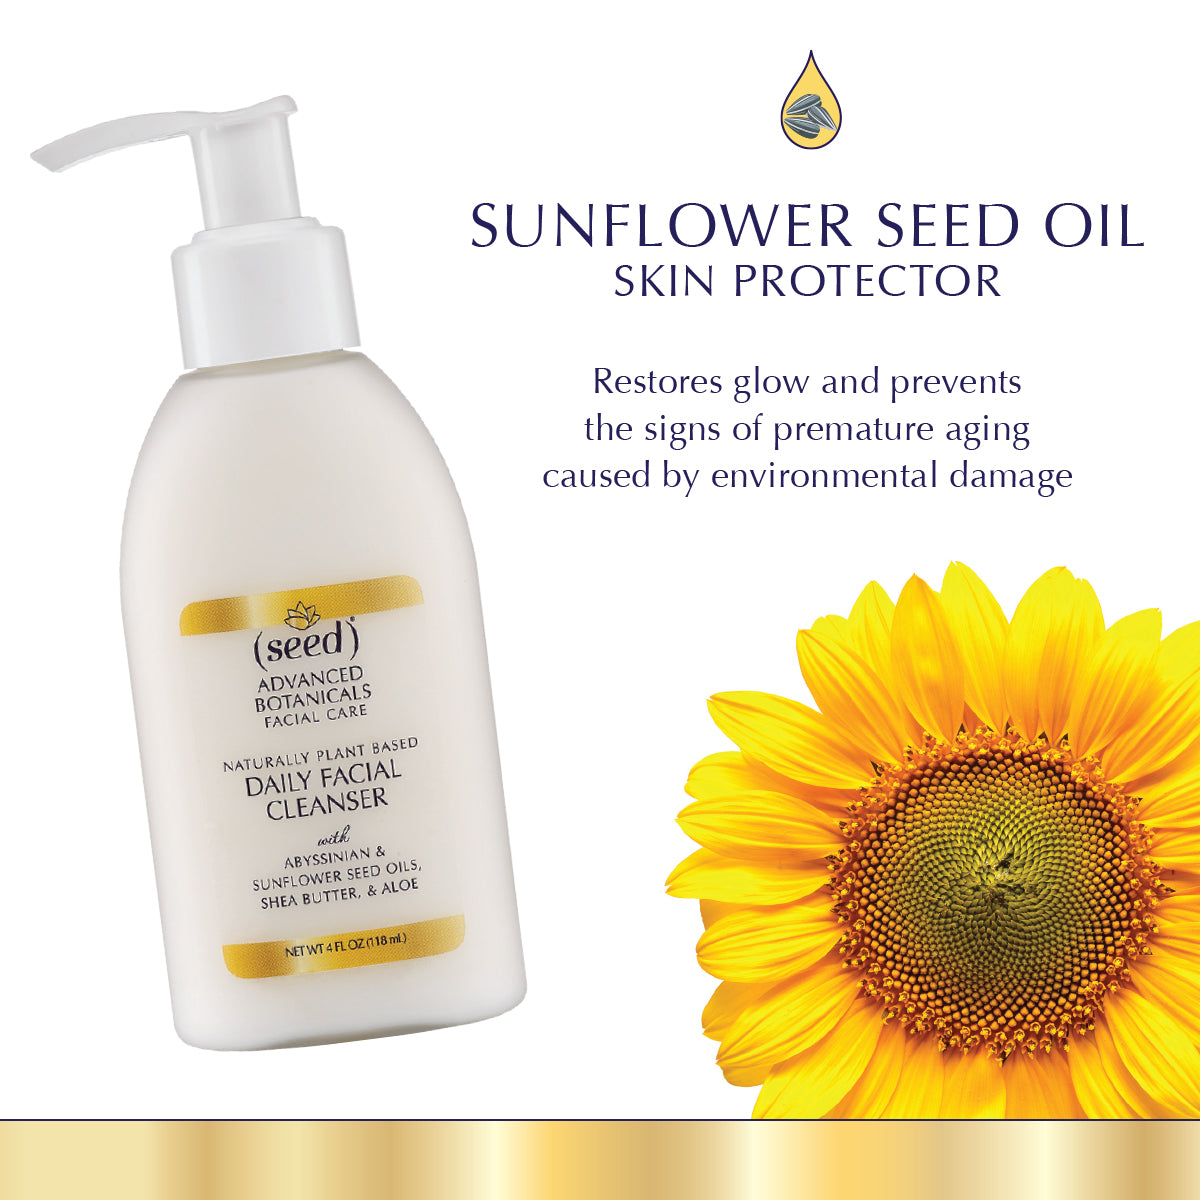 Seed Advanced Botanicals Facial Cleanser Wash features sunflower seed oil